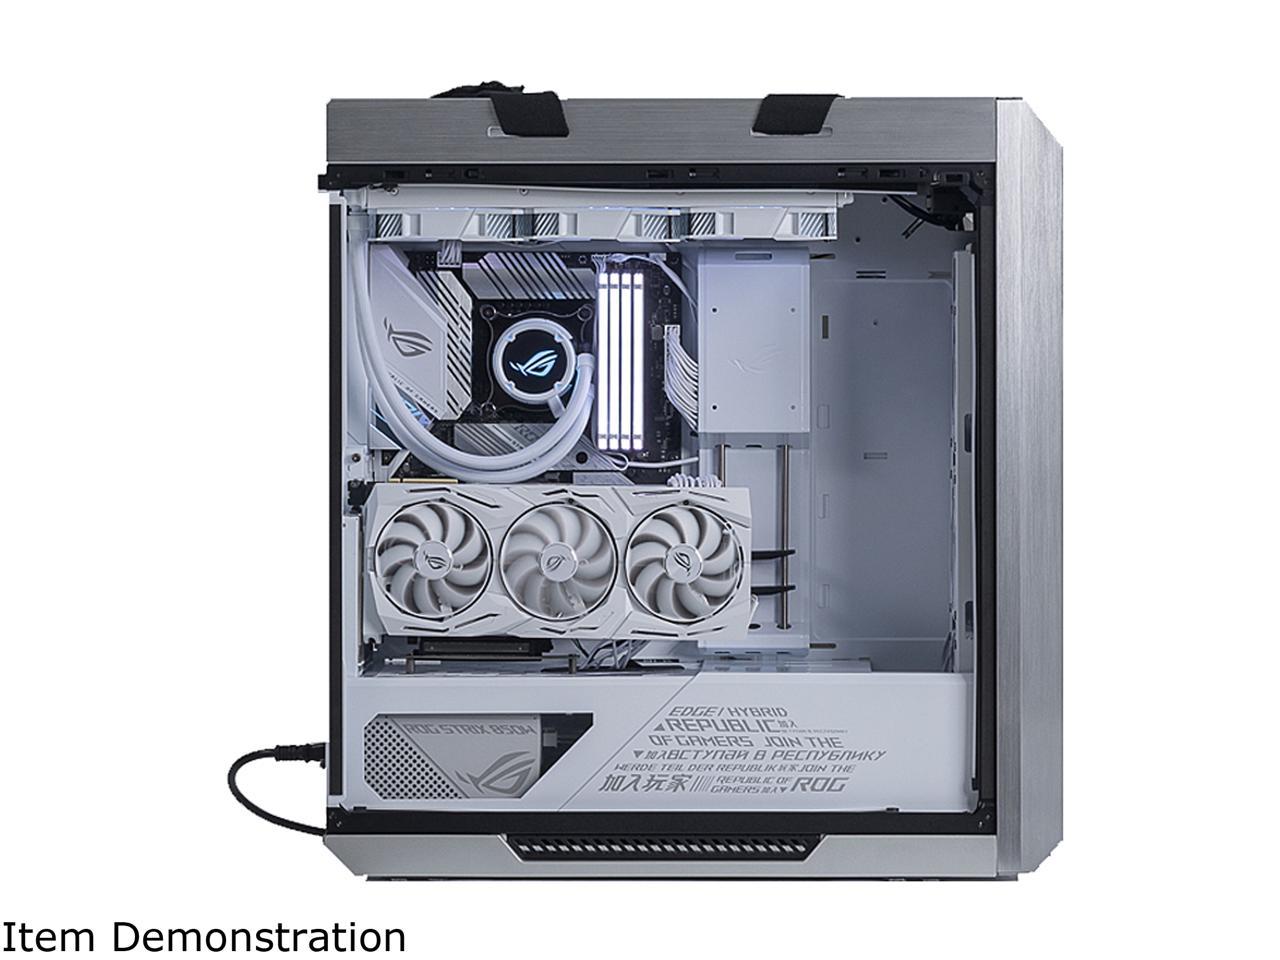 Asus Rog Strix Helios Gx601 White Edition Rgb Mid Tower Computer Case For Atx Eatx Motherboards